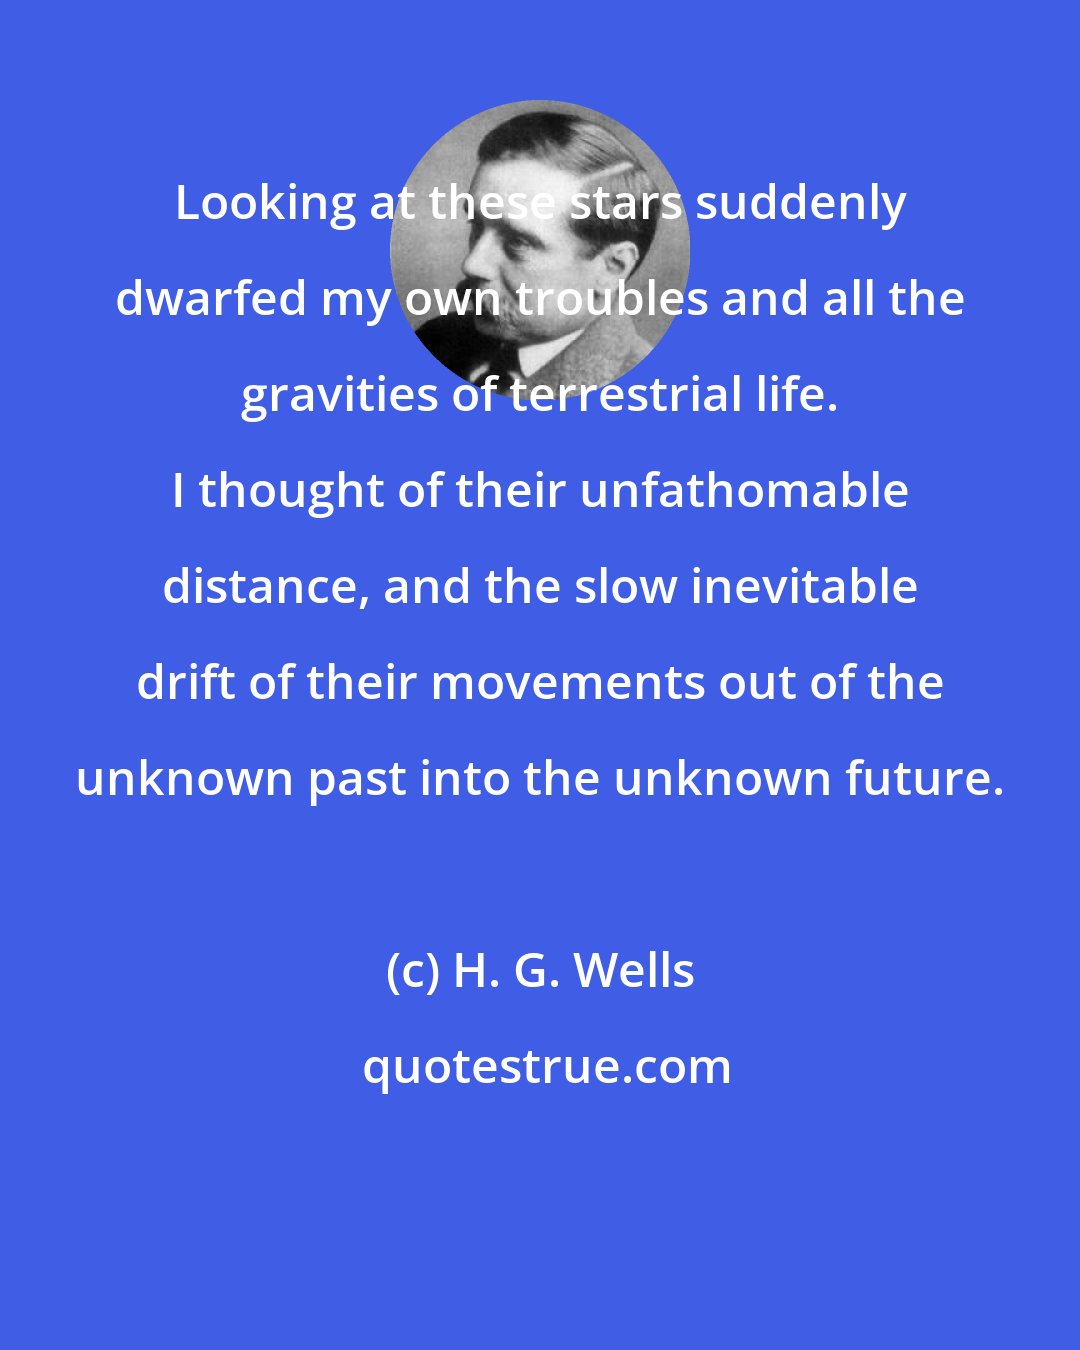 H. G. Wells: Looking at these stars suddenly dwarfed my own troubles and all the gravities of terrestrial life. I thought of their unfathomable distance, and the slow inevitable drift of their movements out of the unknown past into the unknown future.